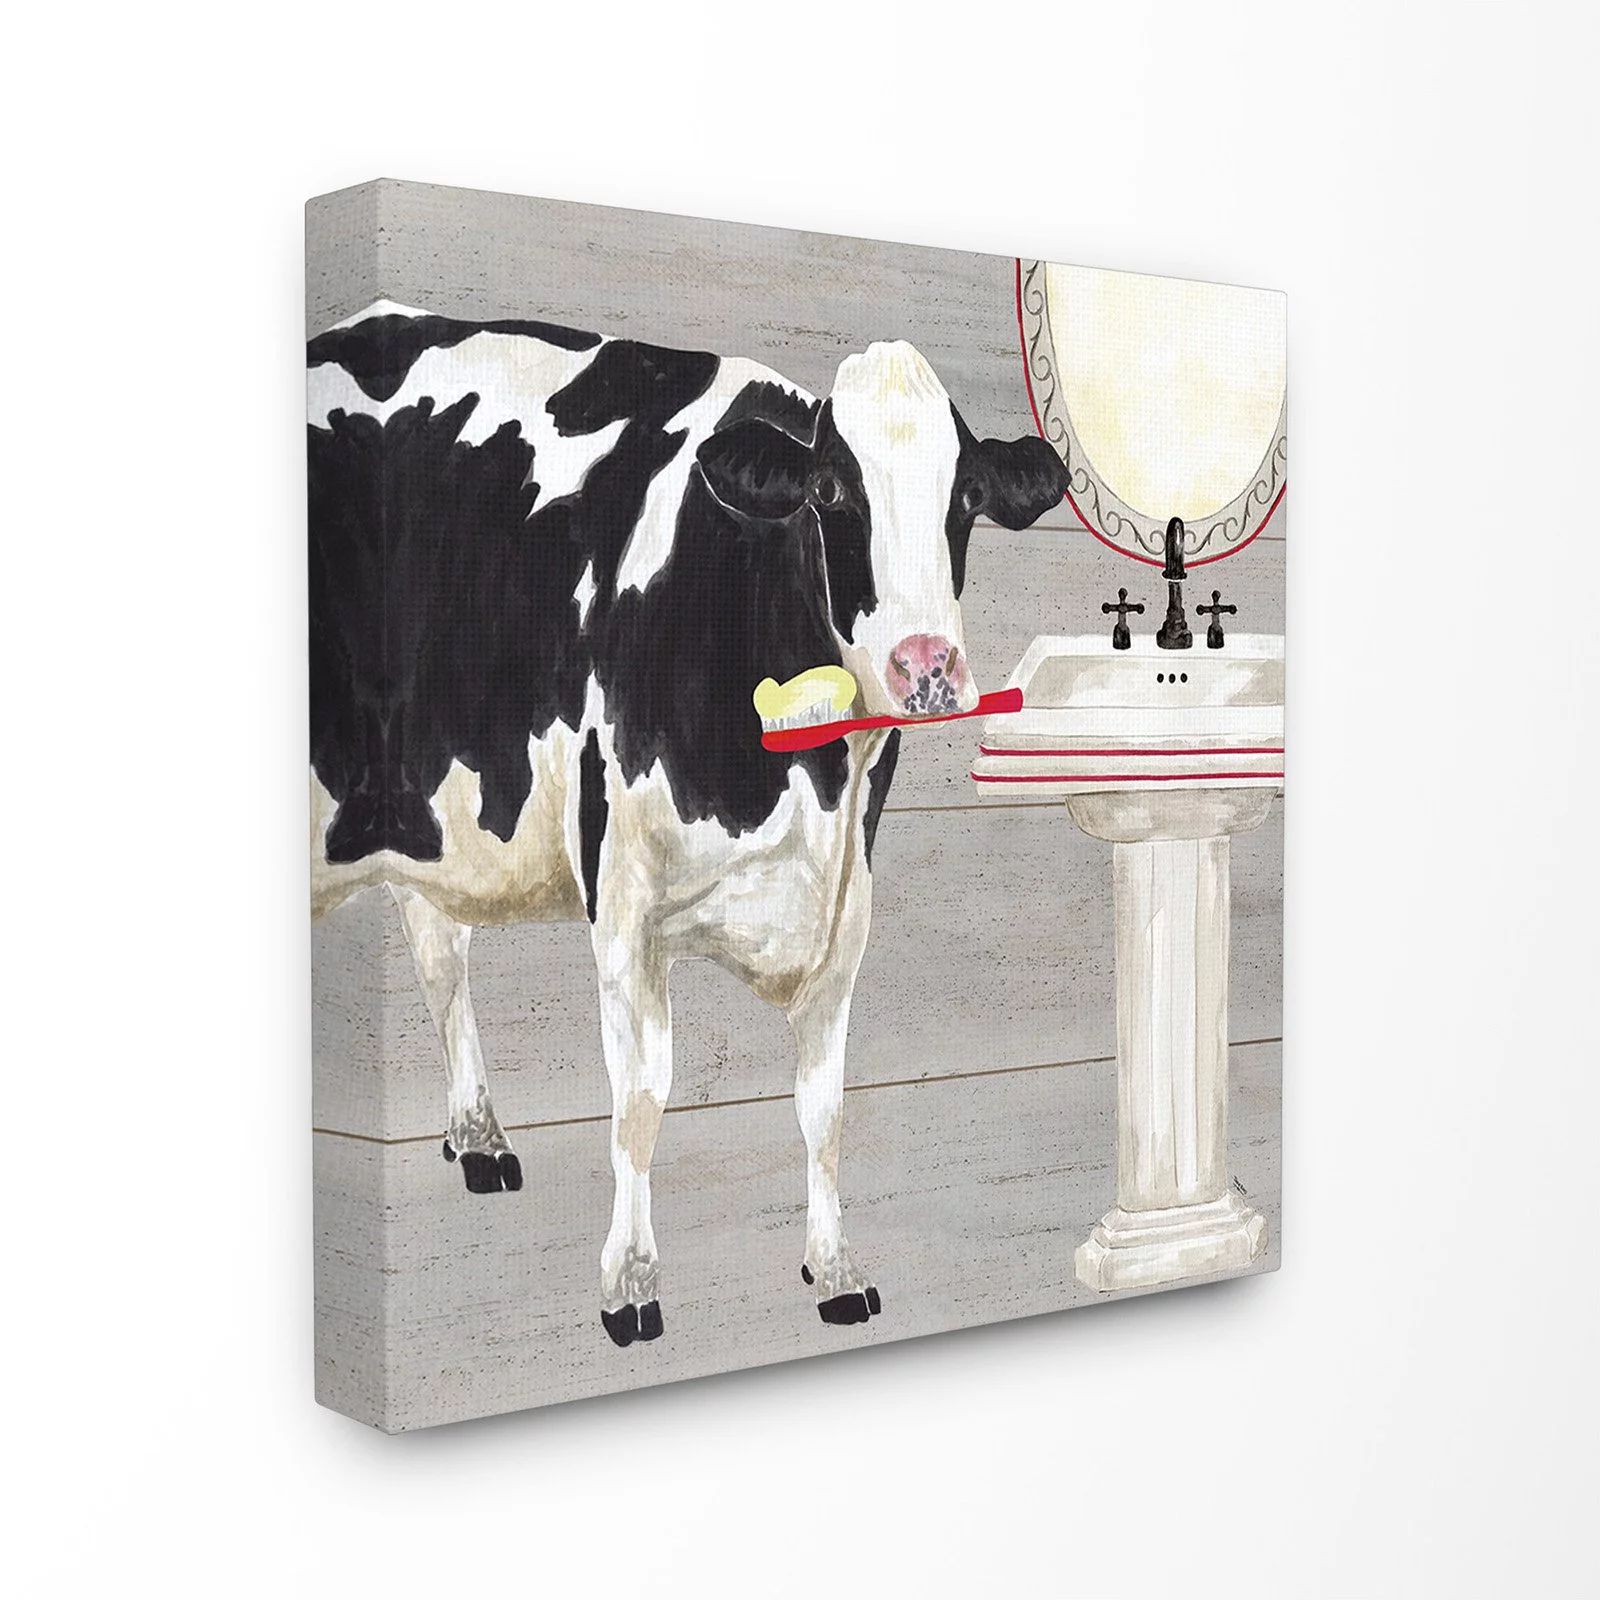 The Stupell Home Decor Collection Bath Time For Cows at Sink Canvas Wall Art - Walmart.com | Walmart (US)